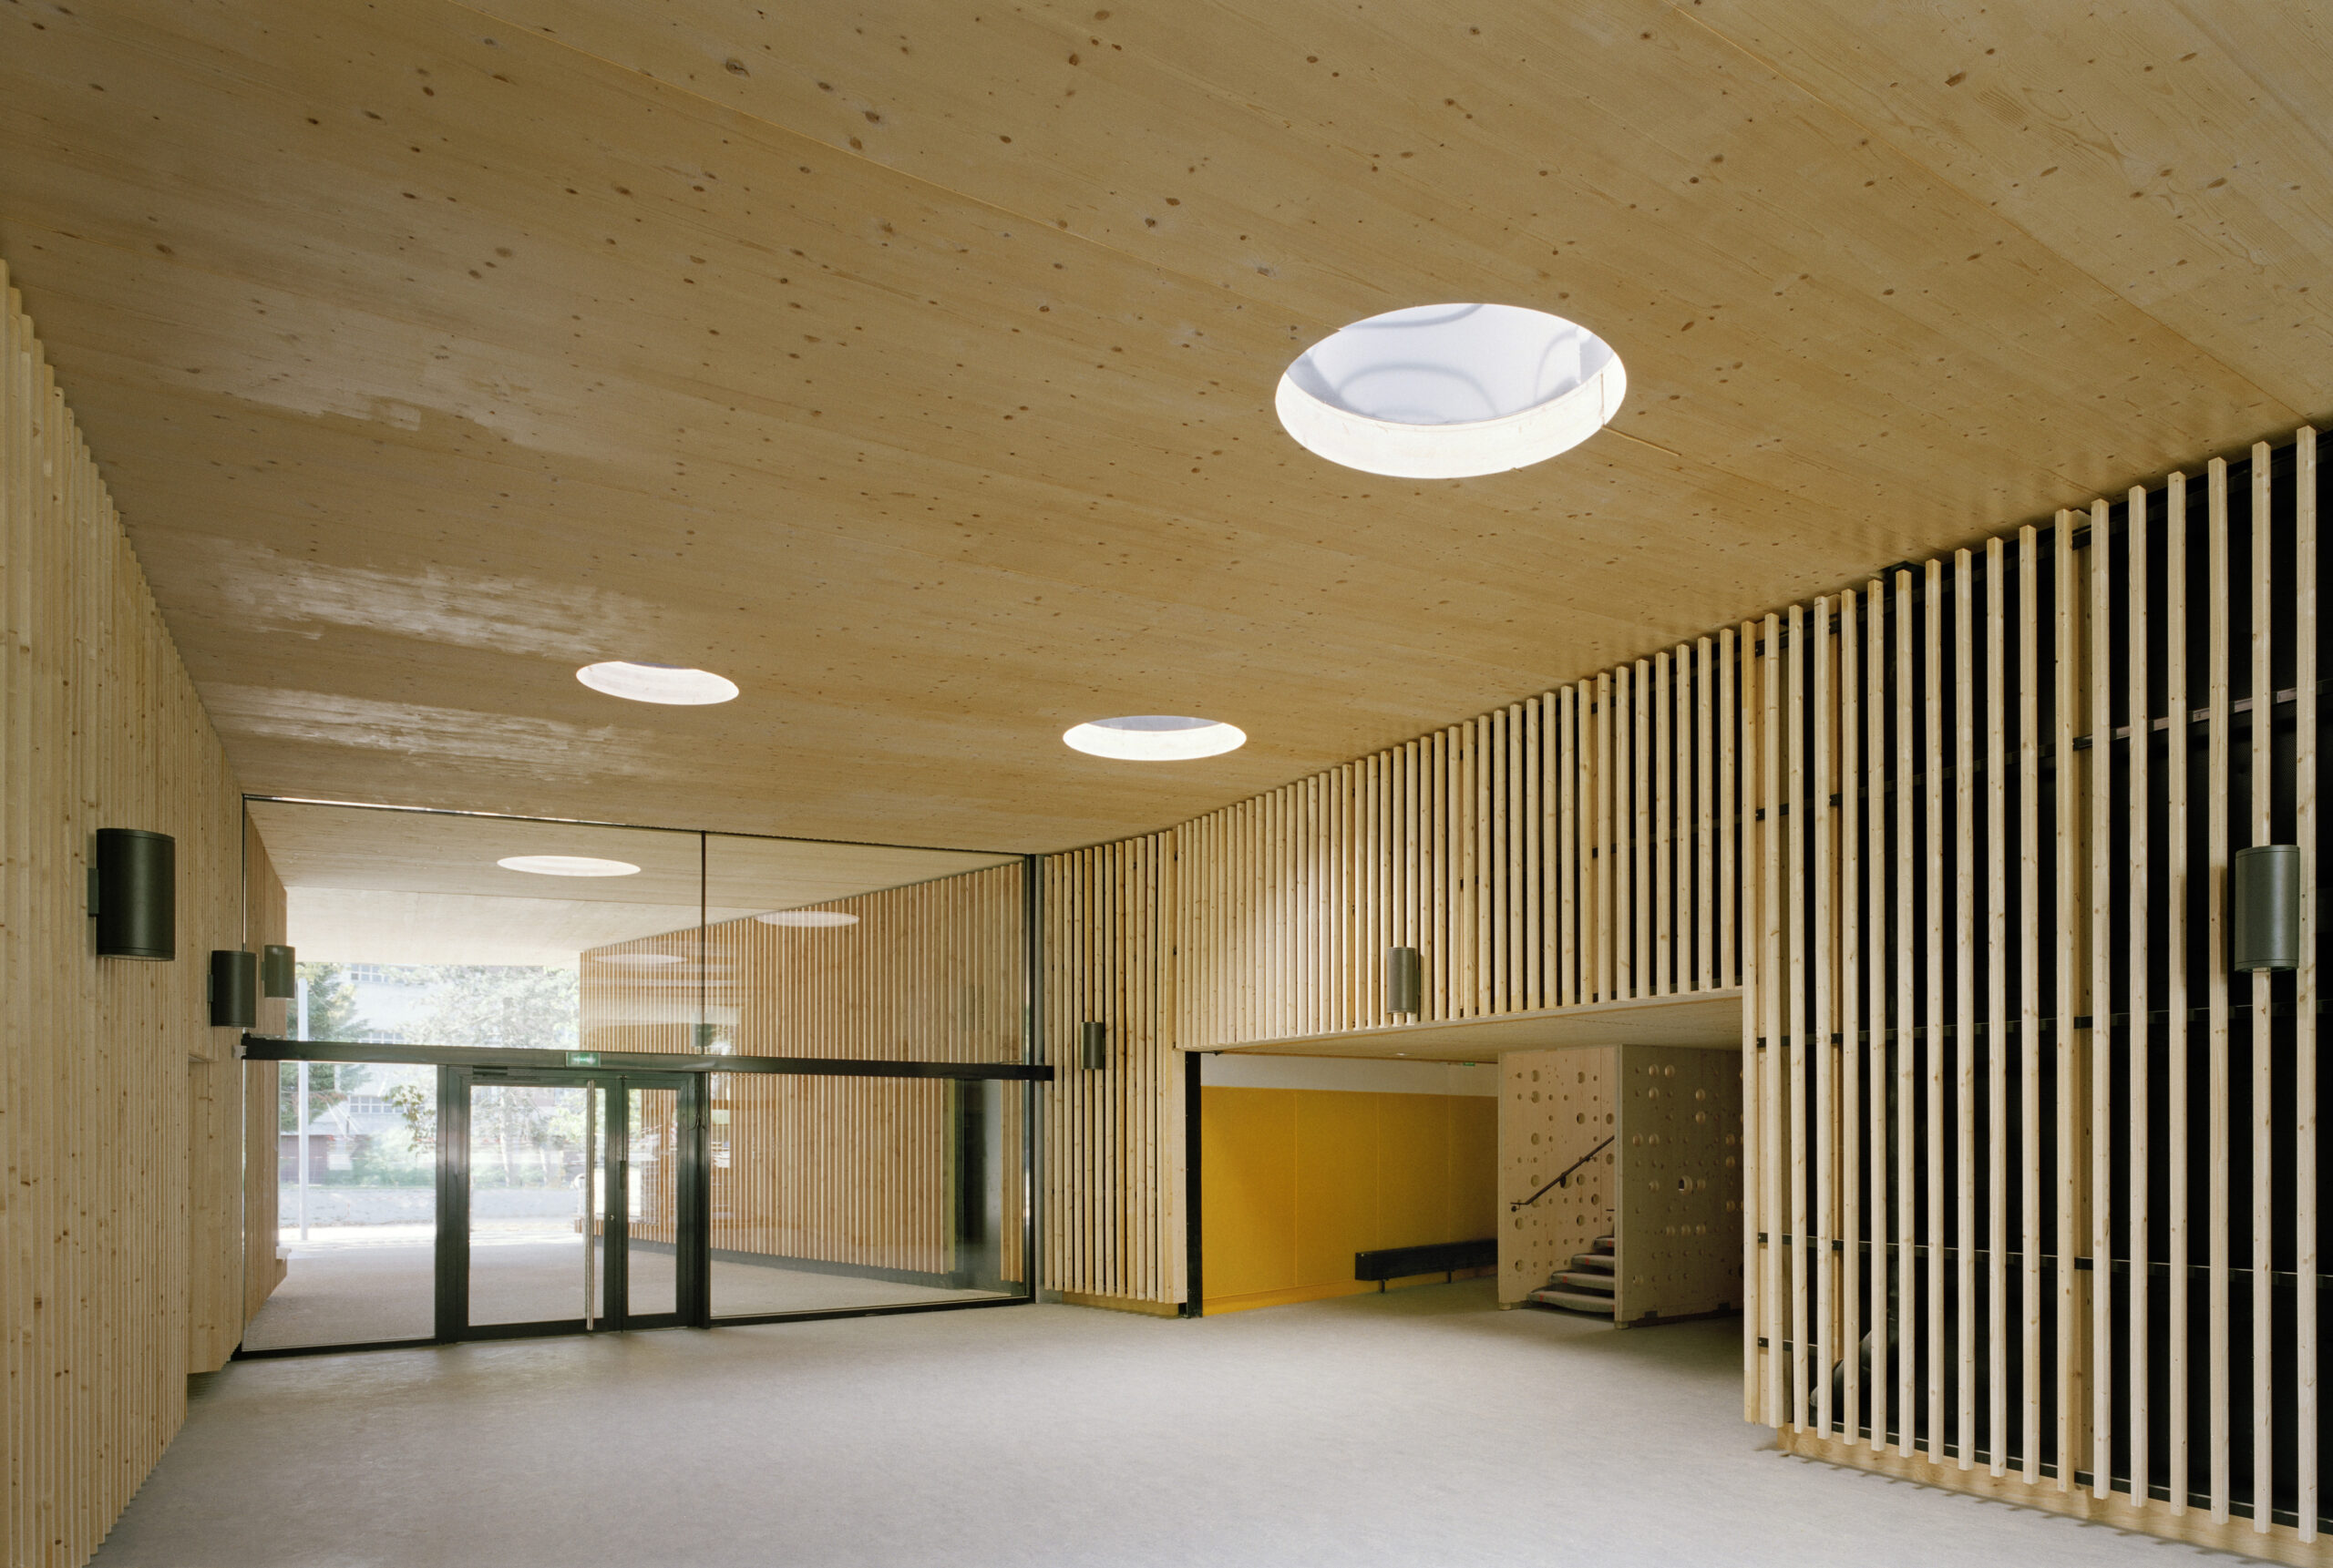 An interior shot of the warm and inviting wooden entrance of the school, featuring wooden cladding and ceiling, which is further accentuated by innovative circular skylights